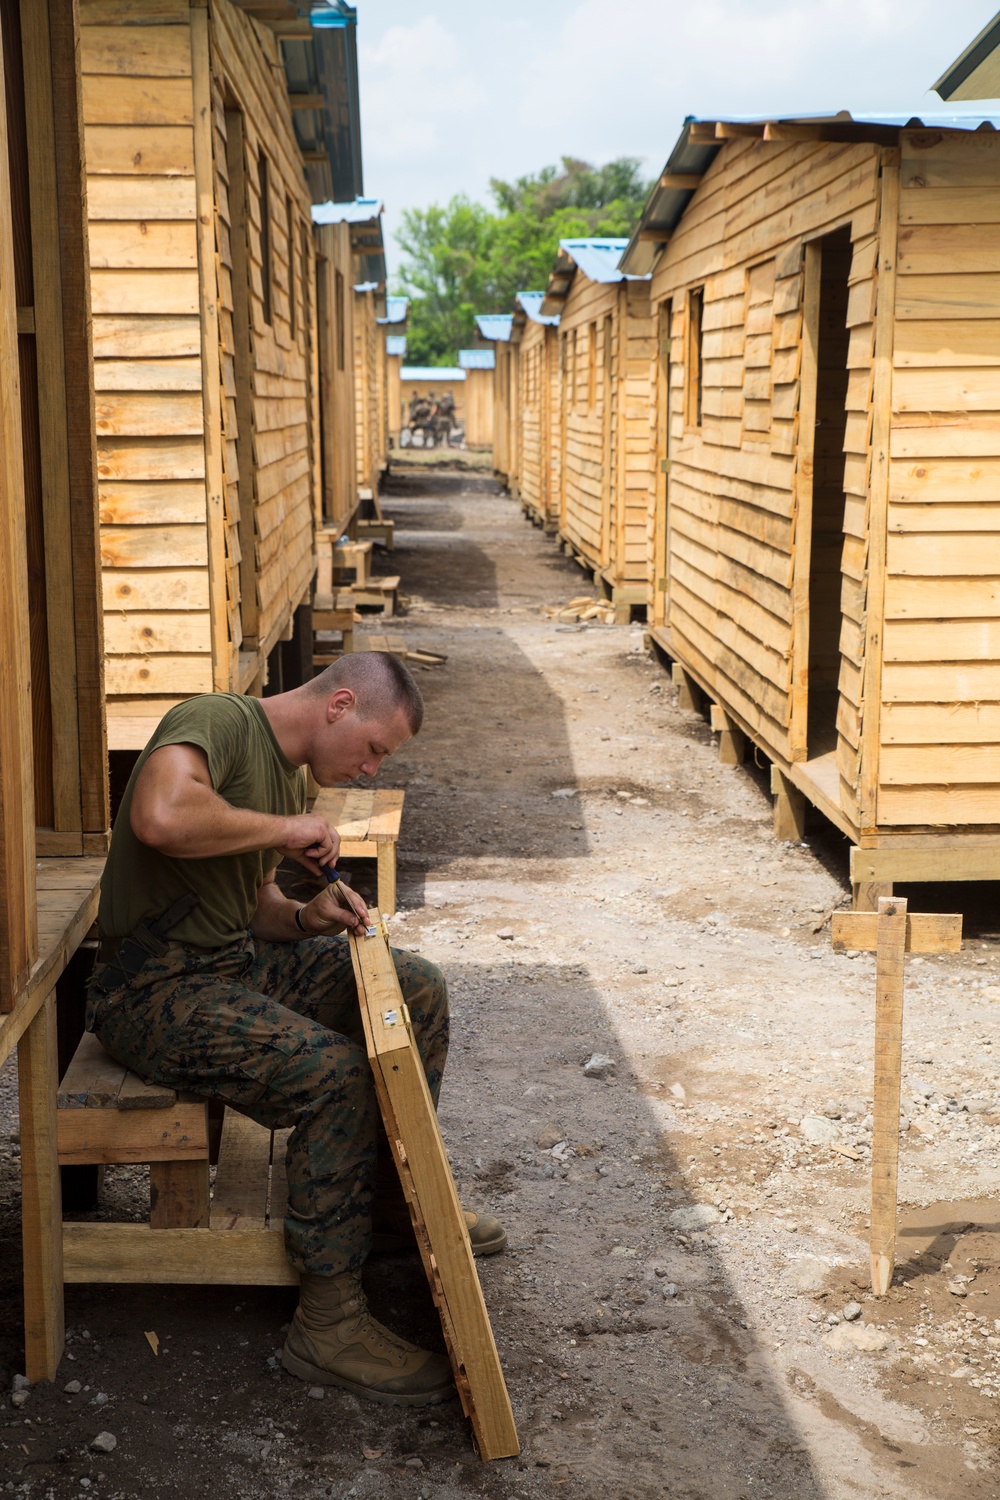 Hammers and shovels: Marines pitch in with Guatemalans to help those displaced by volcano